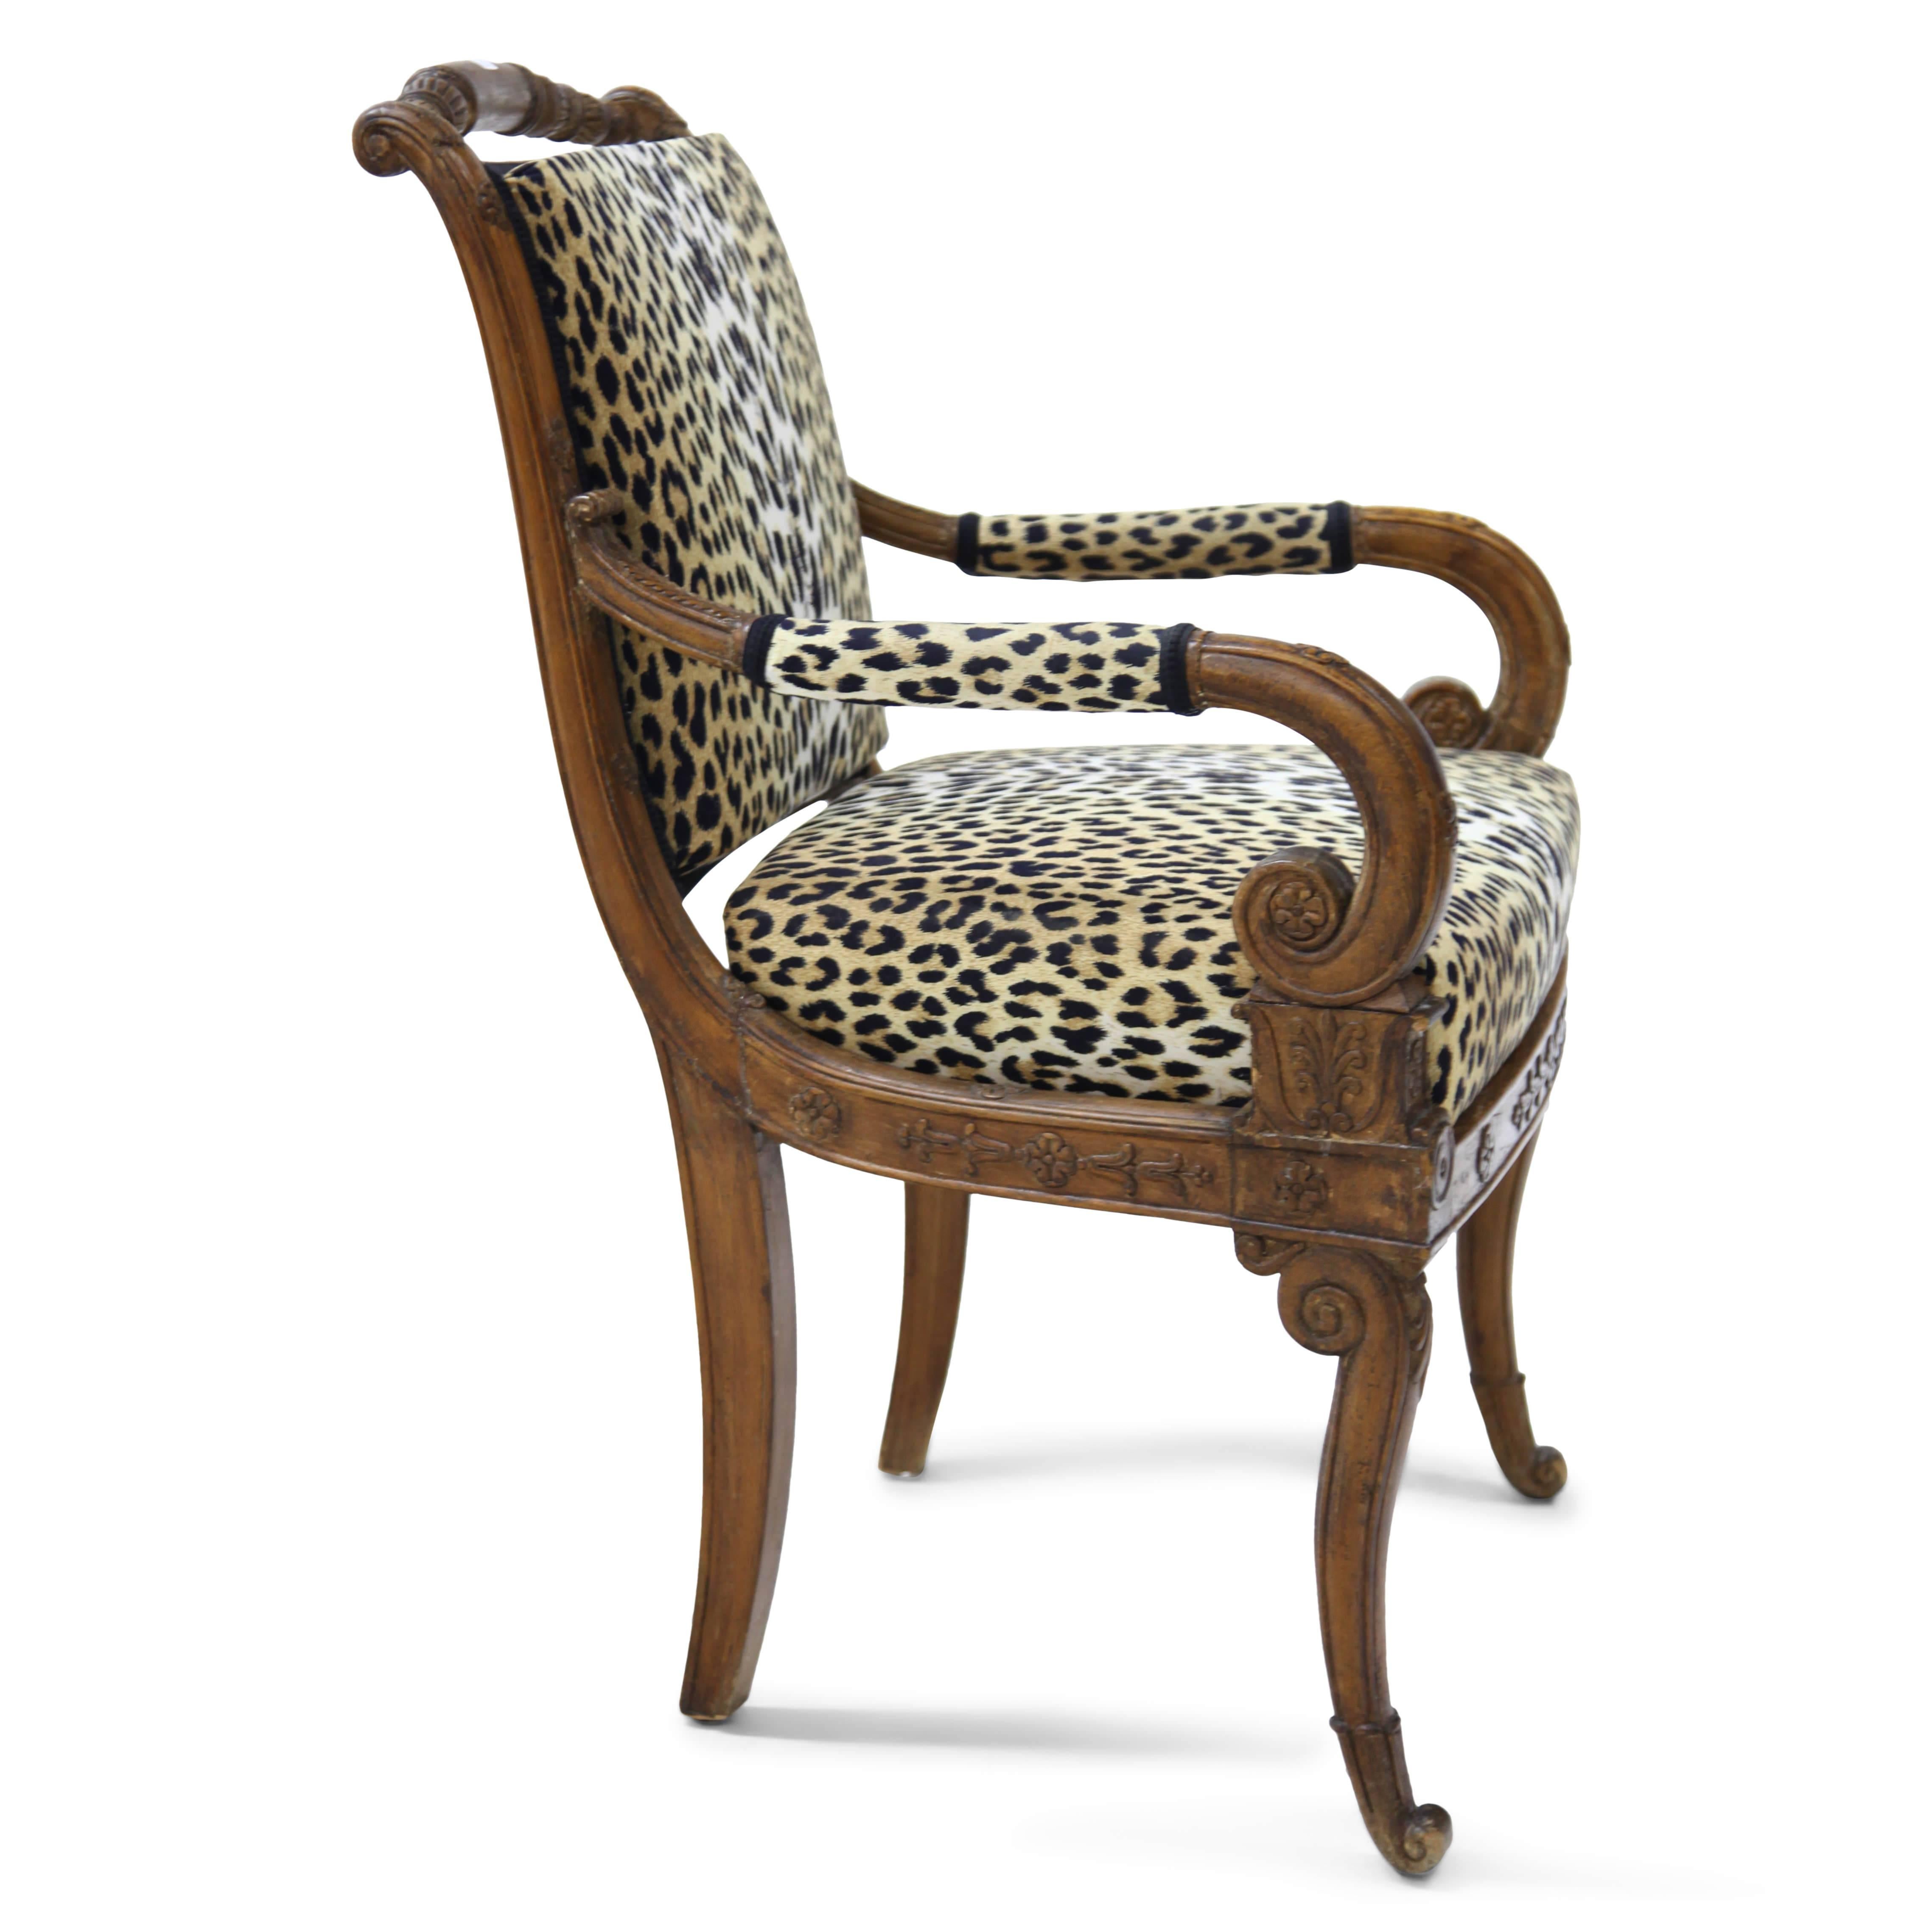 Armchair with neoclassical carvings on the railing, the armrests and backrest. The chair stands on volute-shaped feet in the front and slightly curved legs in the back. The armrests end in volutes. Seat and backrest are upholstered with a leopard